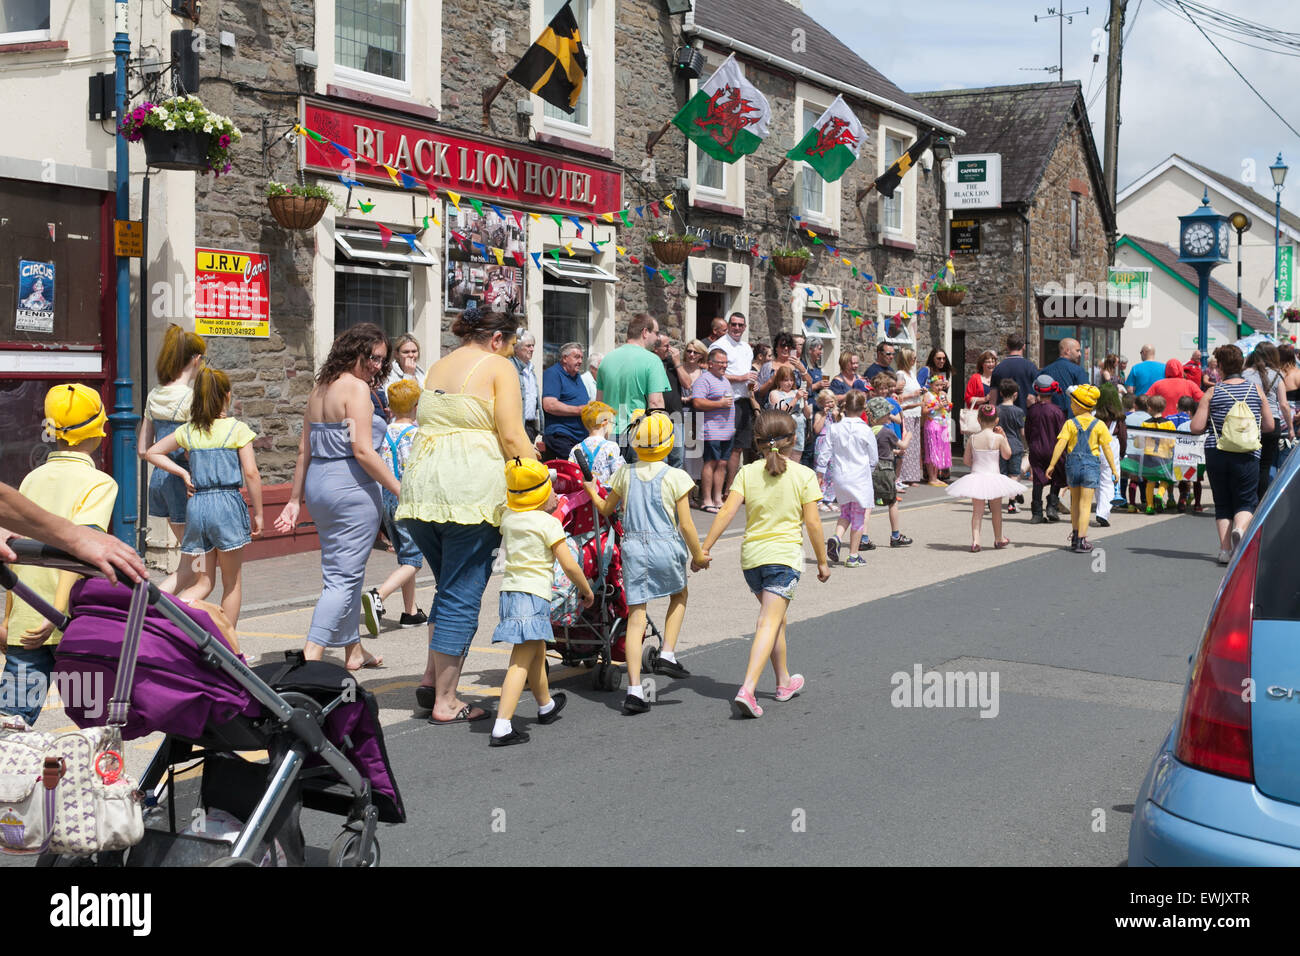 Black Lion Hotel in St Clears Carnival June 2015 in Pembrokeshire Wales.  Town parade. Stock Photo